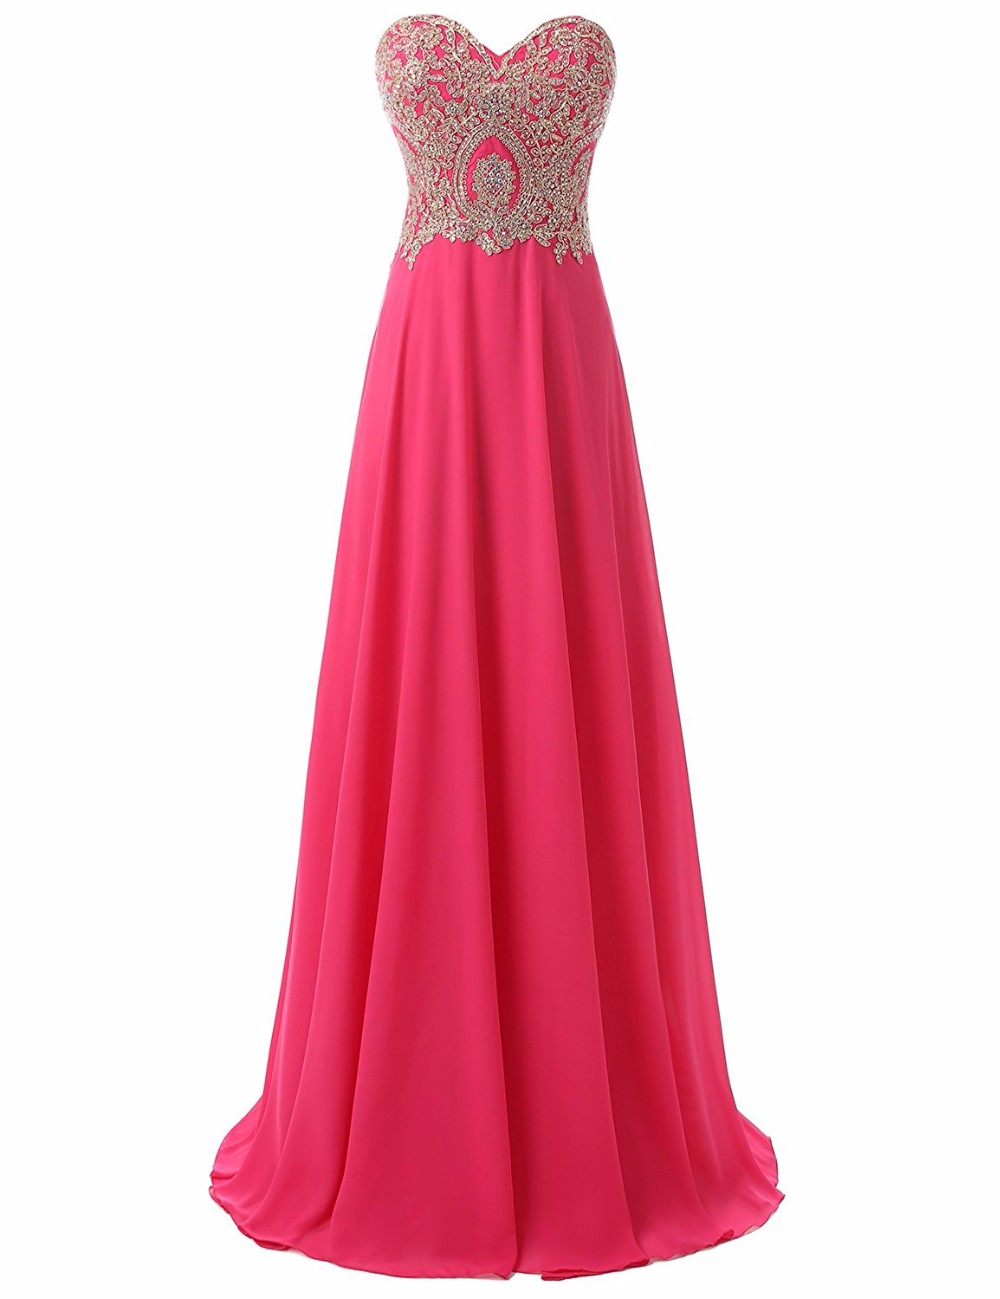 Elegant Evening Dress Long Beading Prom Dress Formal Party Gown